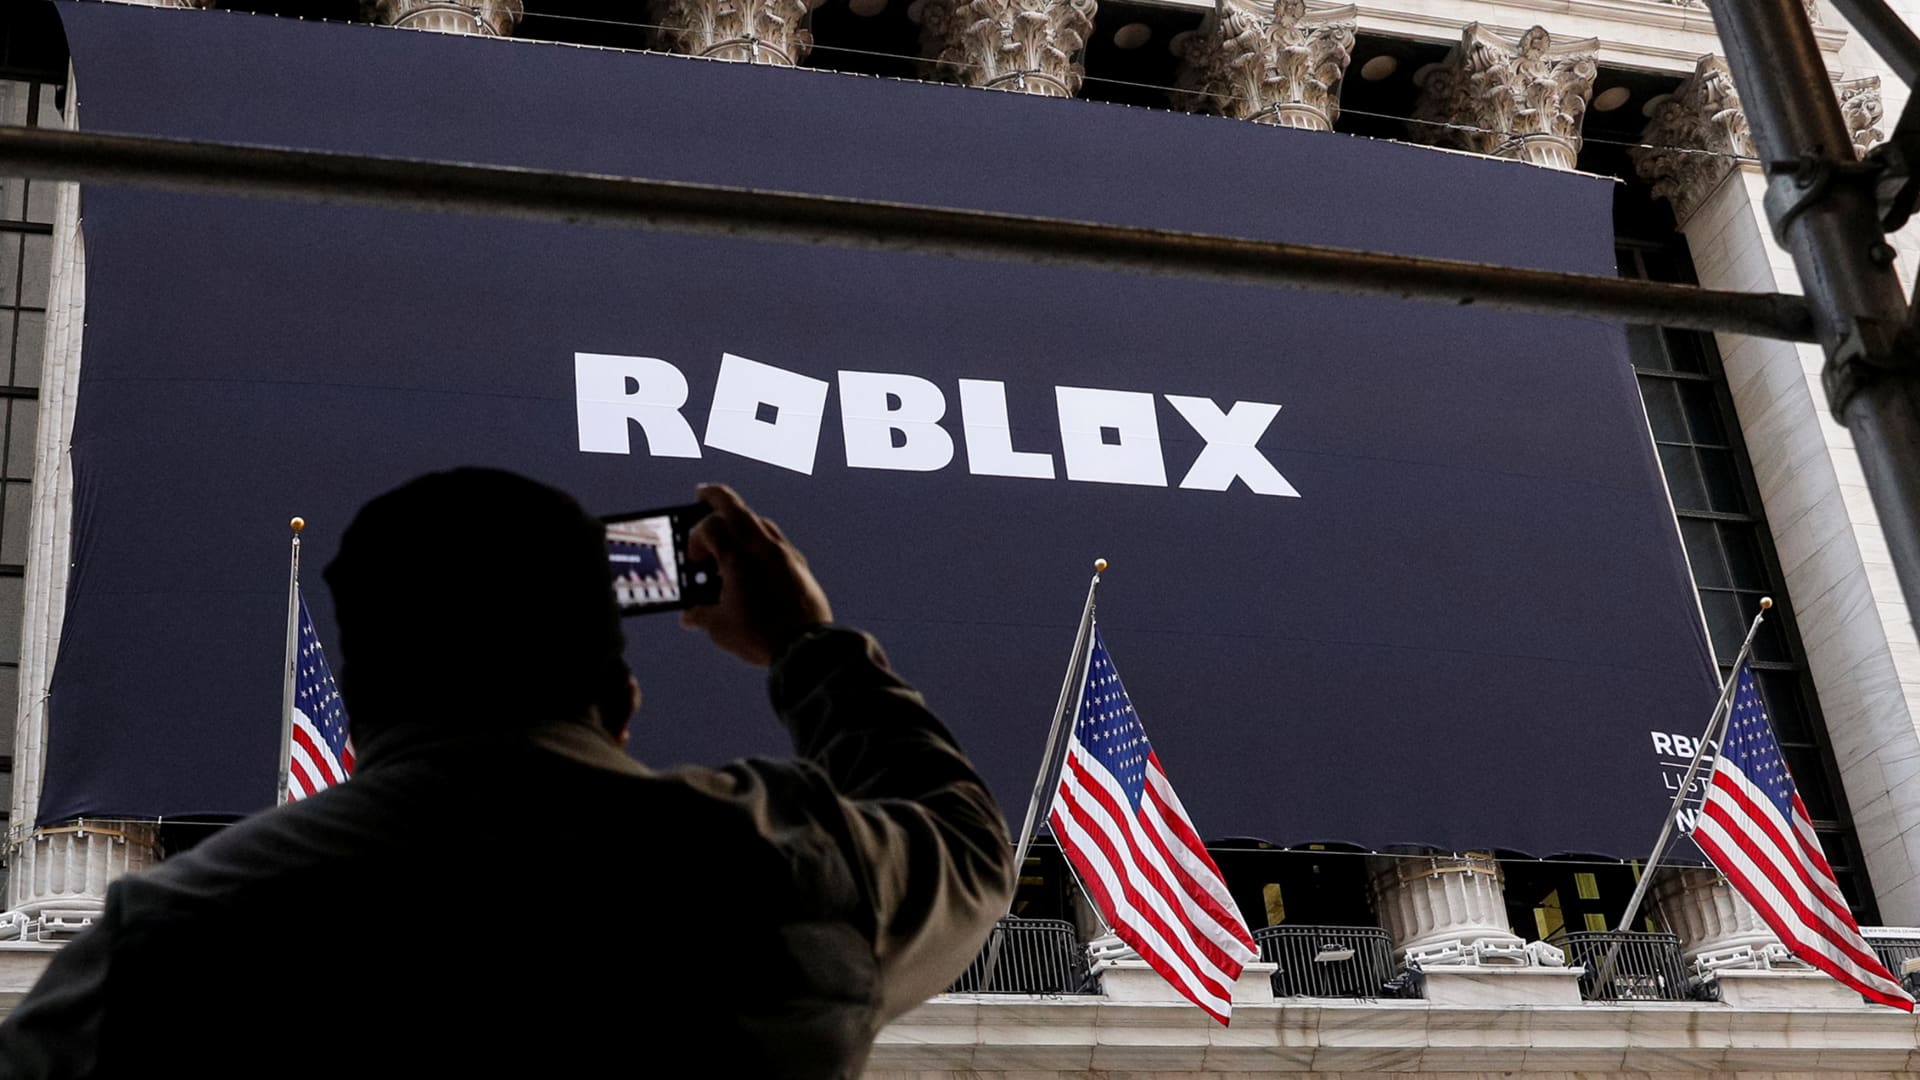 Roblox stock sinks after November update shows slowing growth